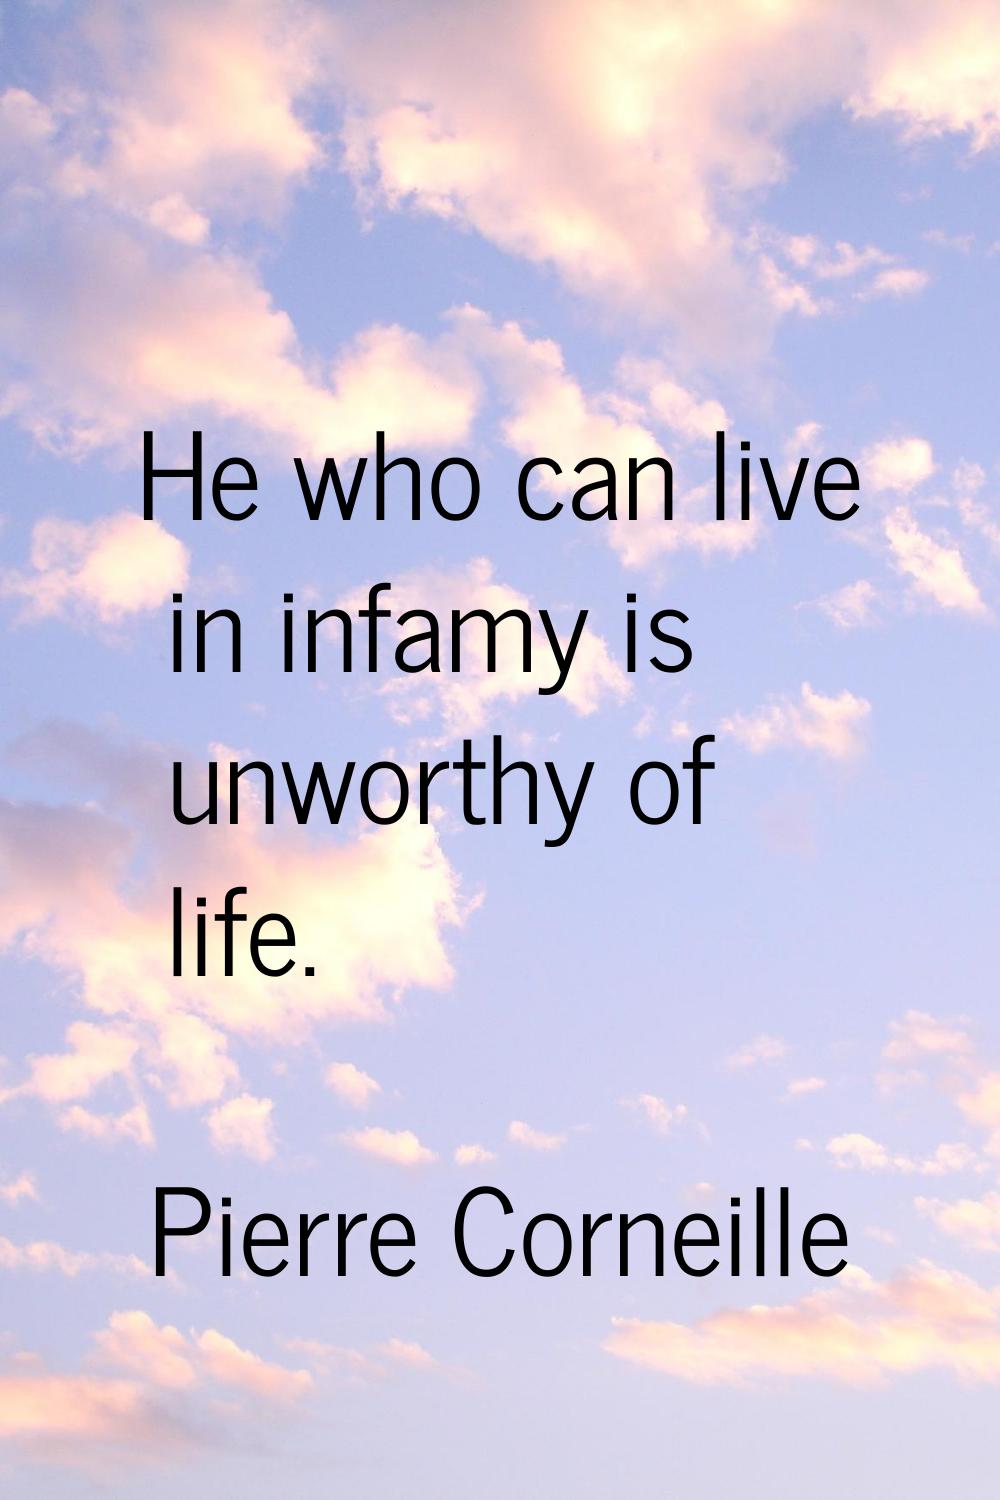 He who can live in infamy is unworthy of life.